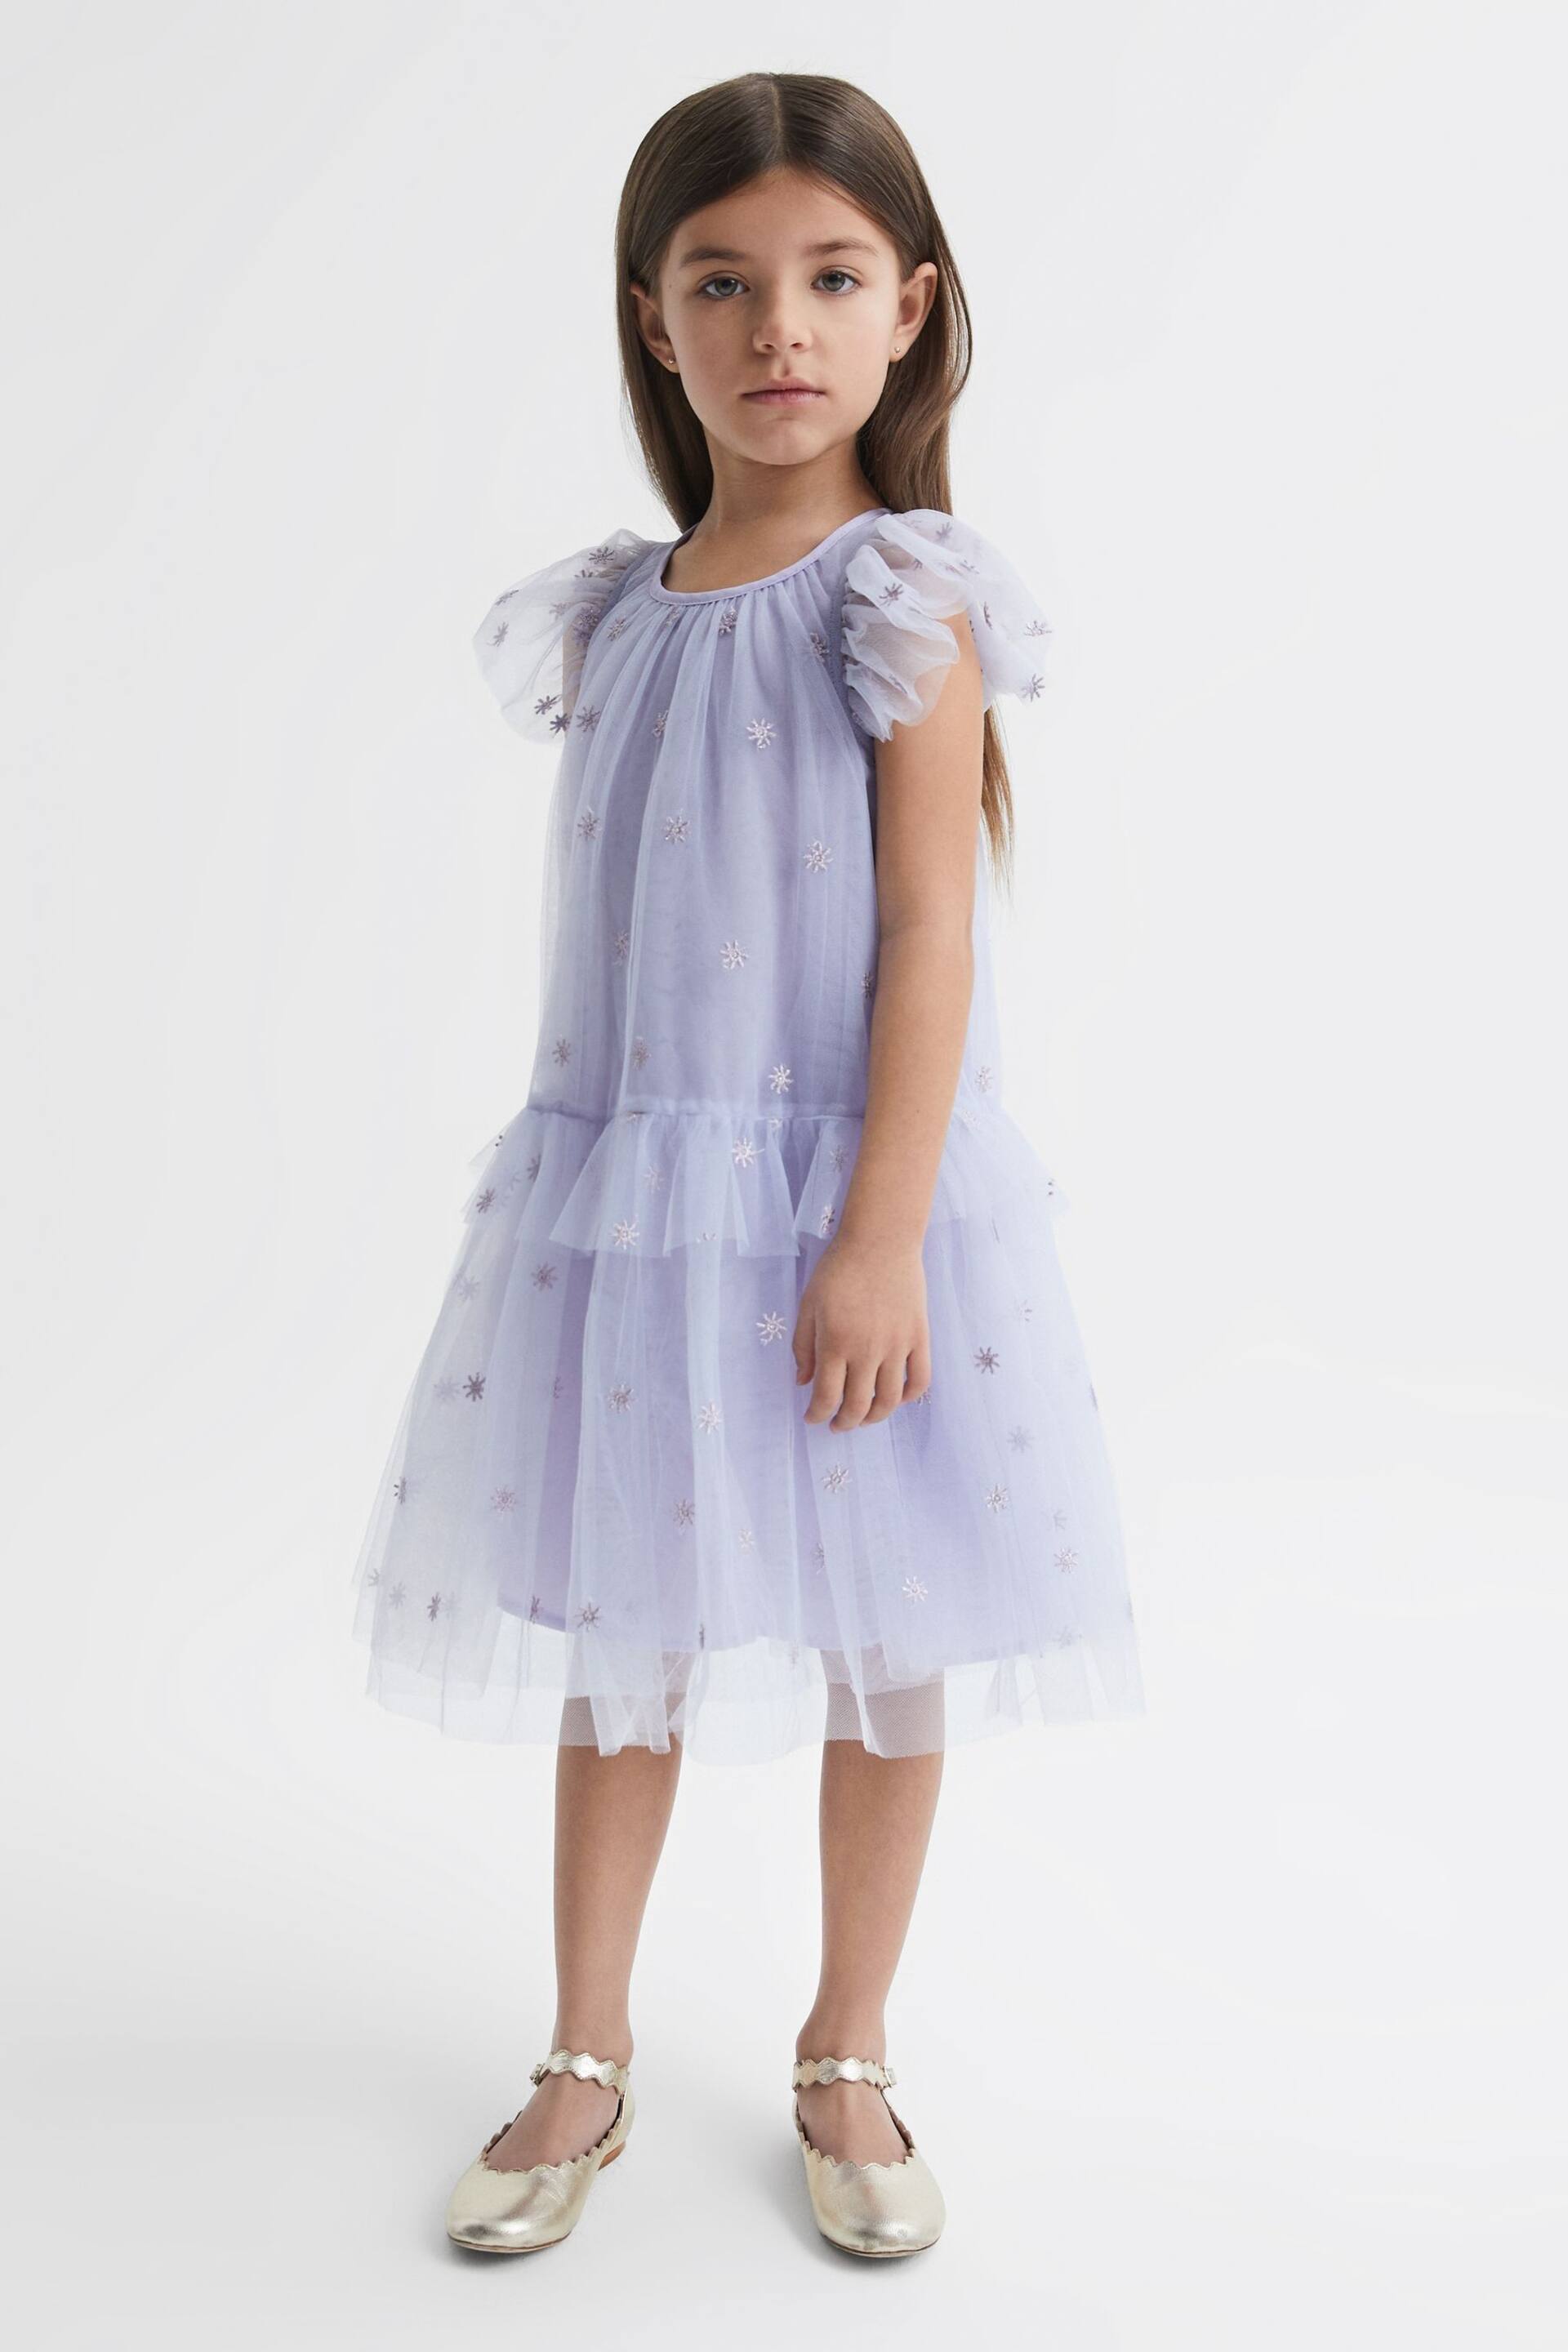 Reiss Lilac Fifi Senior Tulle Embroidered Dress - Image 1 of 6